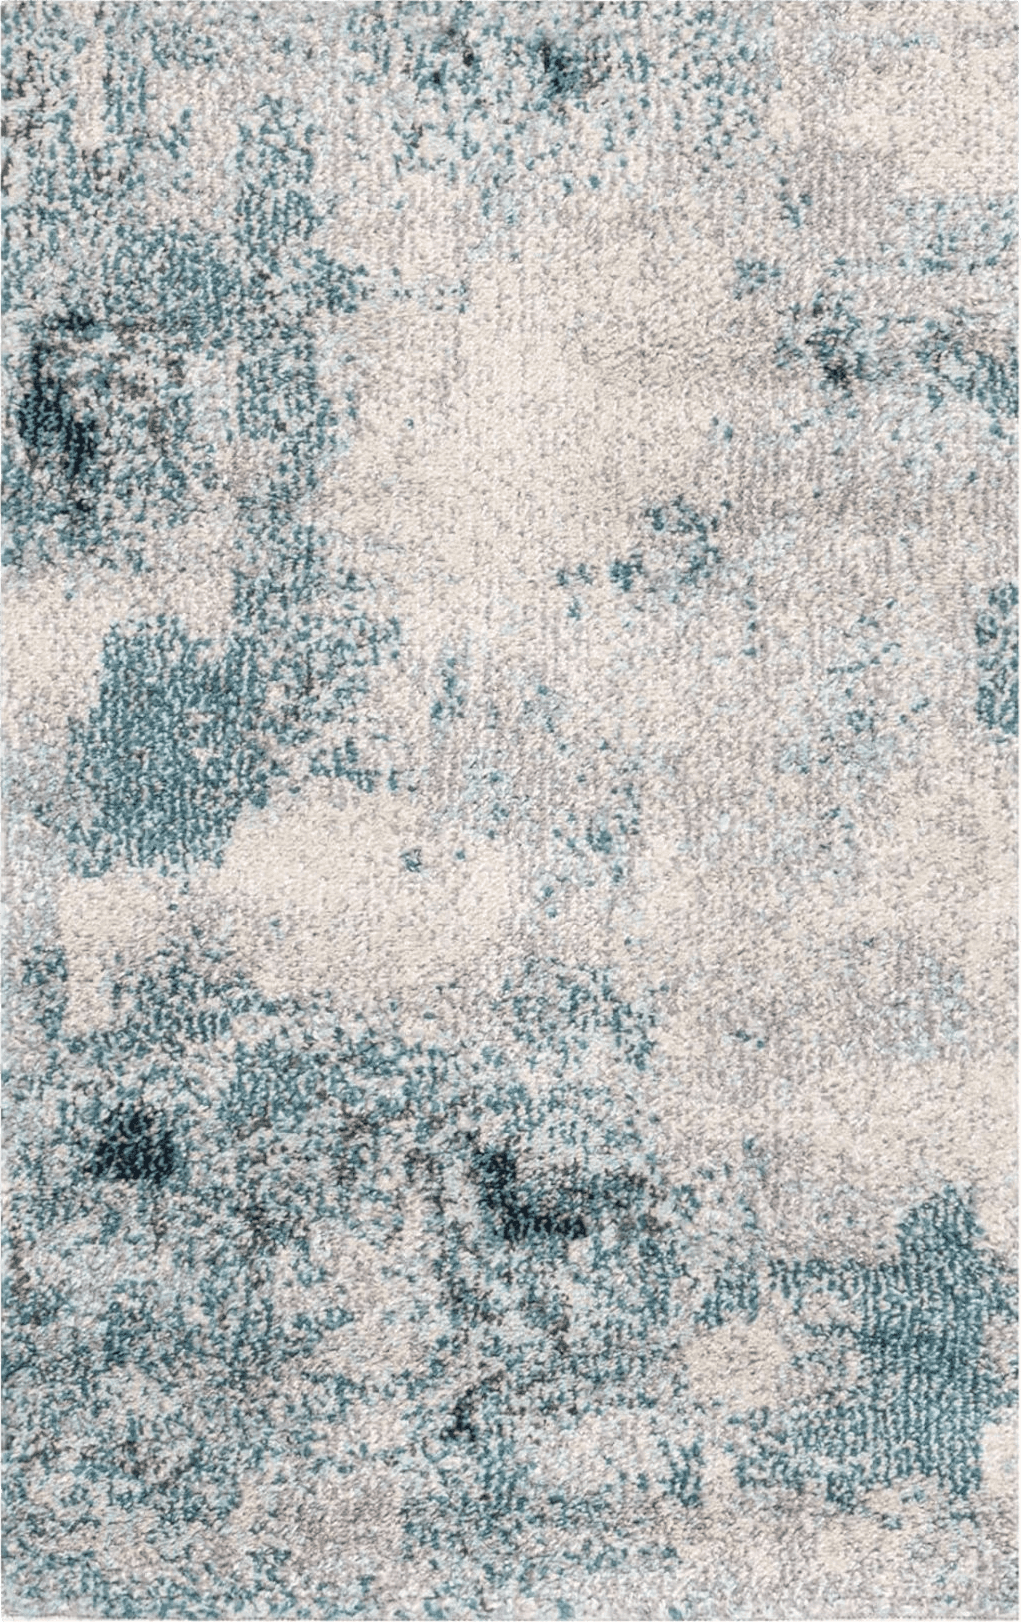 Area Blue JONATHAN Y CTP104A-23 Contemporary POP Vintage Modern Abstract Indoor Area Rug,High Traffic,Bedroom,Kitchen,Living Room,Non Shedding,2 X 3,Cream/Blue